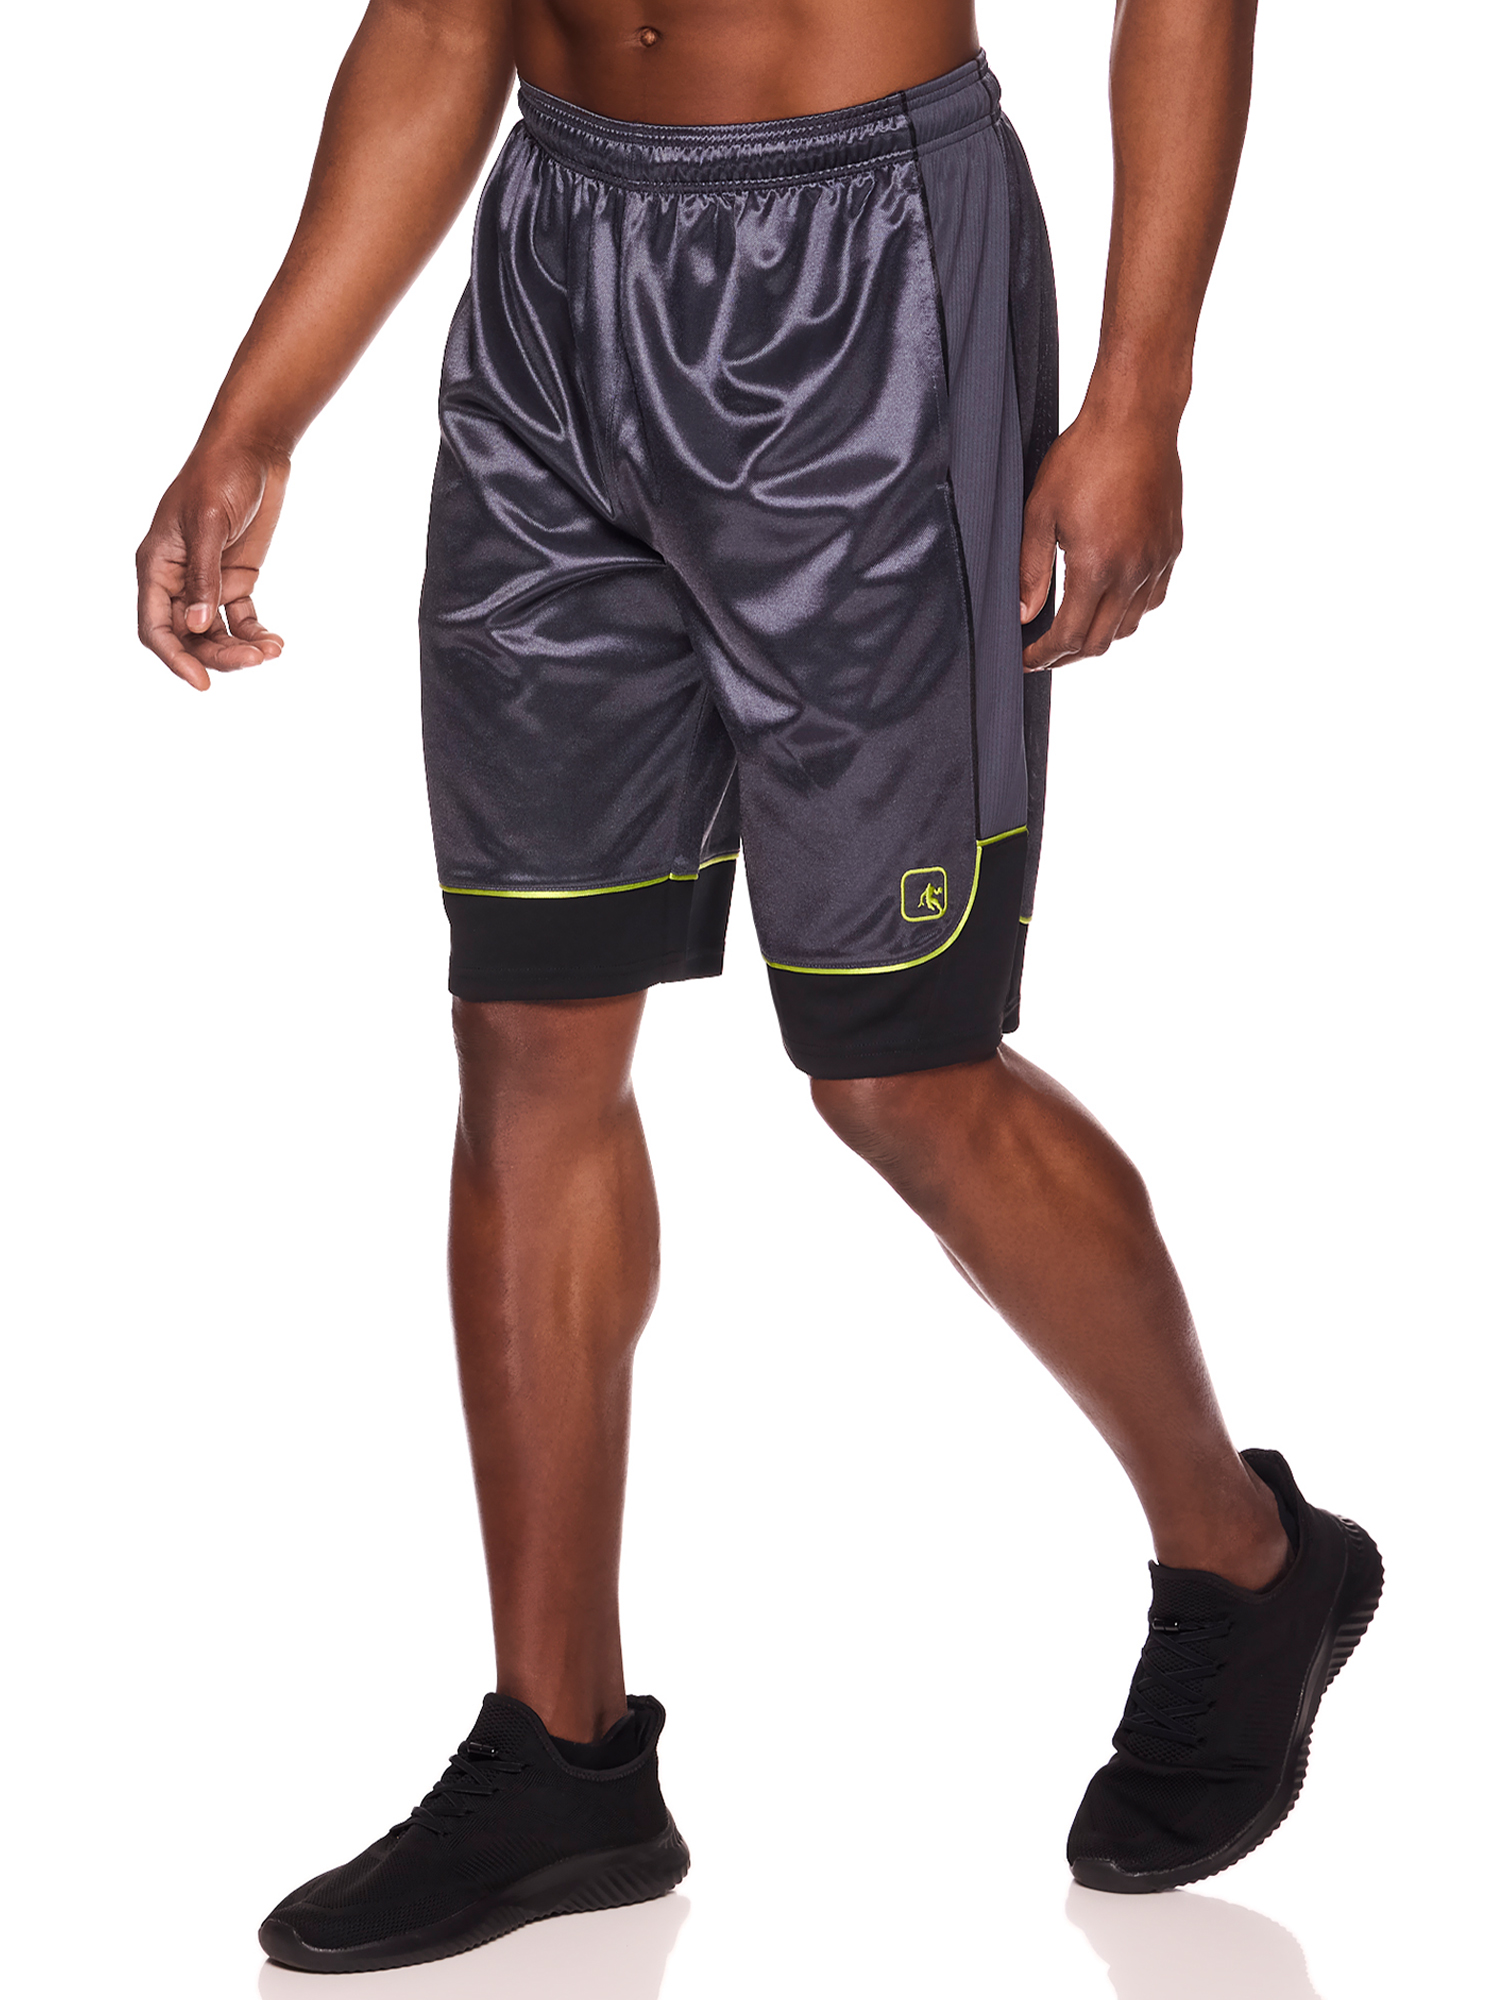 AND1 Men and Big Men's All Court Colorblock 11" Shorts, up to Size 3XL - image 3 of 5